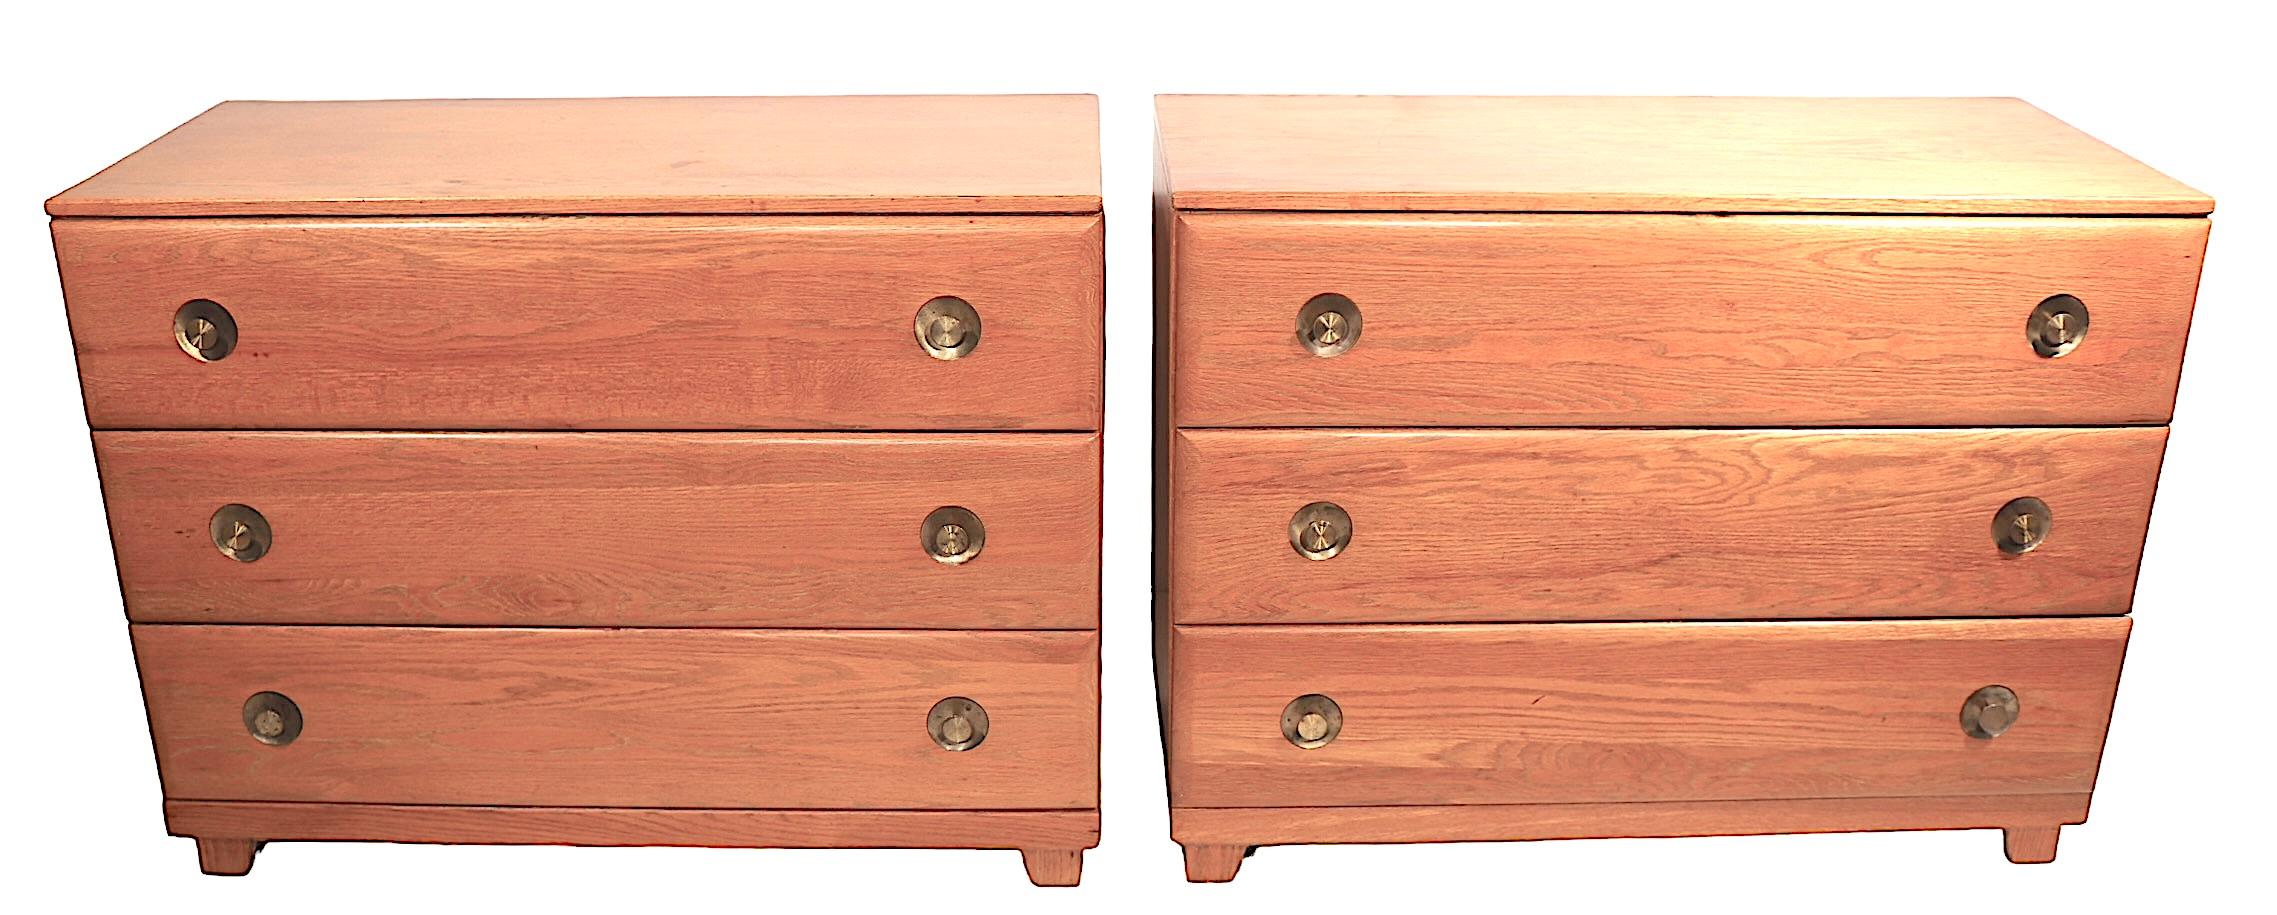 Pr. Mid Century  Bachelors Chests in Cerused Oak with Brass Pulls C 1950's For Sale 5